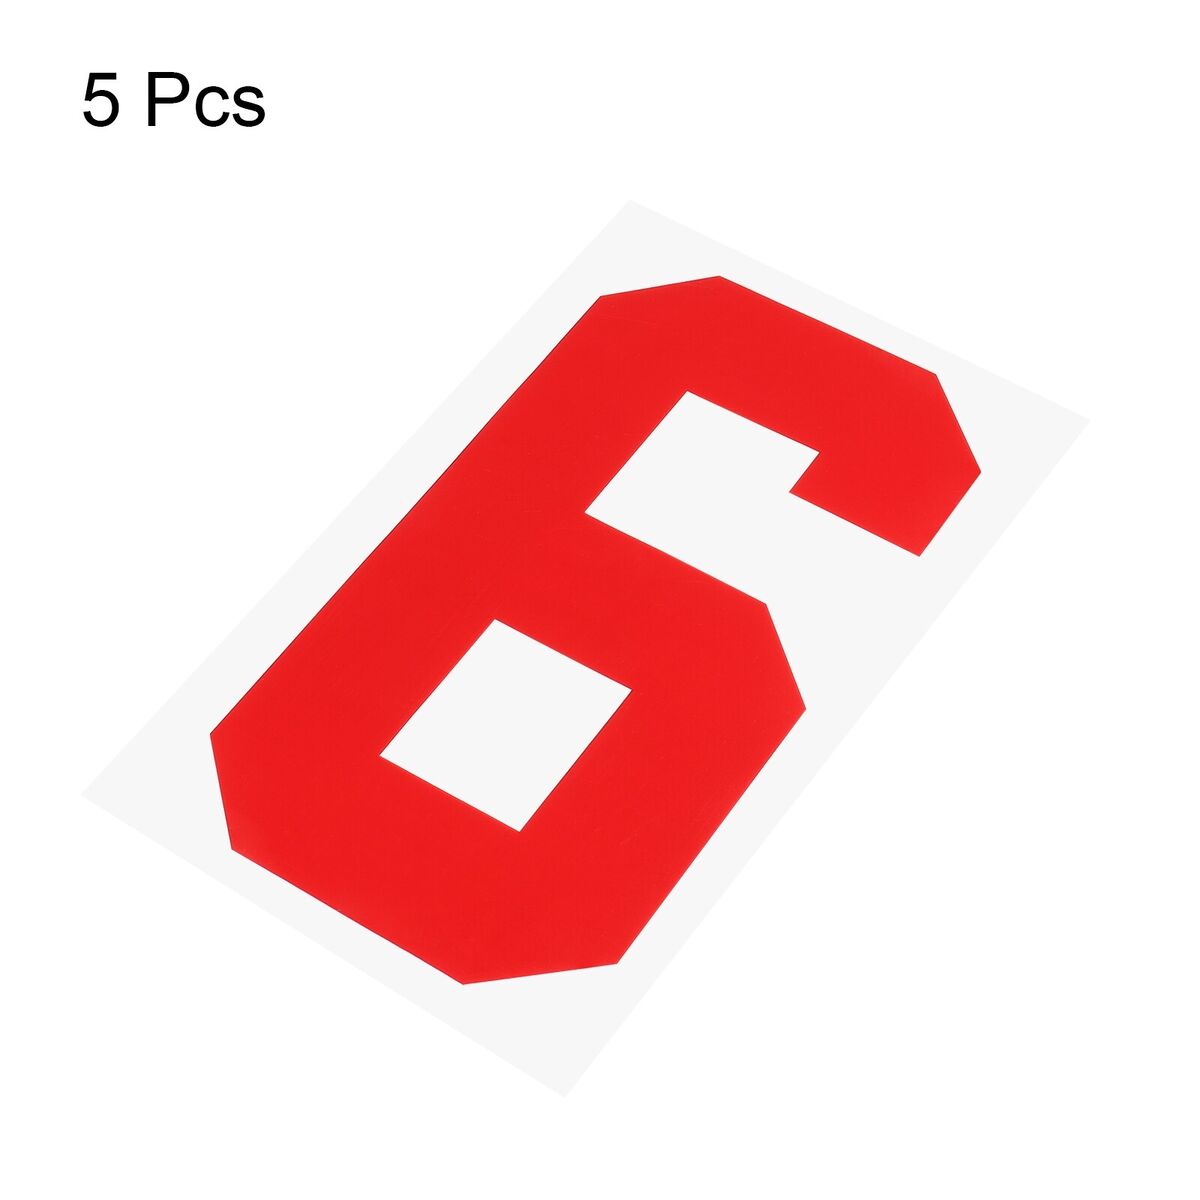 Iron on Numbers 6 Heat Transfer 8 Red Single Number 5Pcs